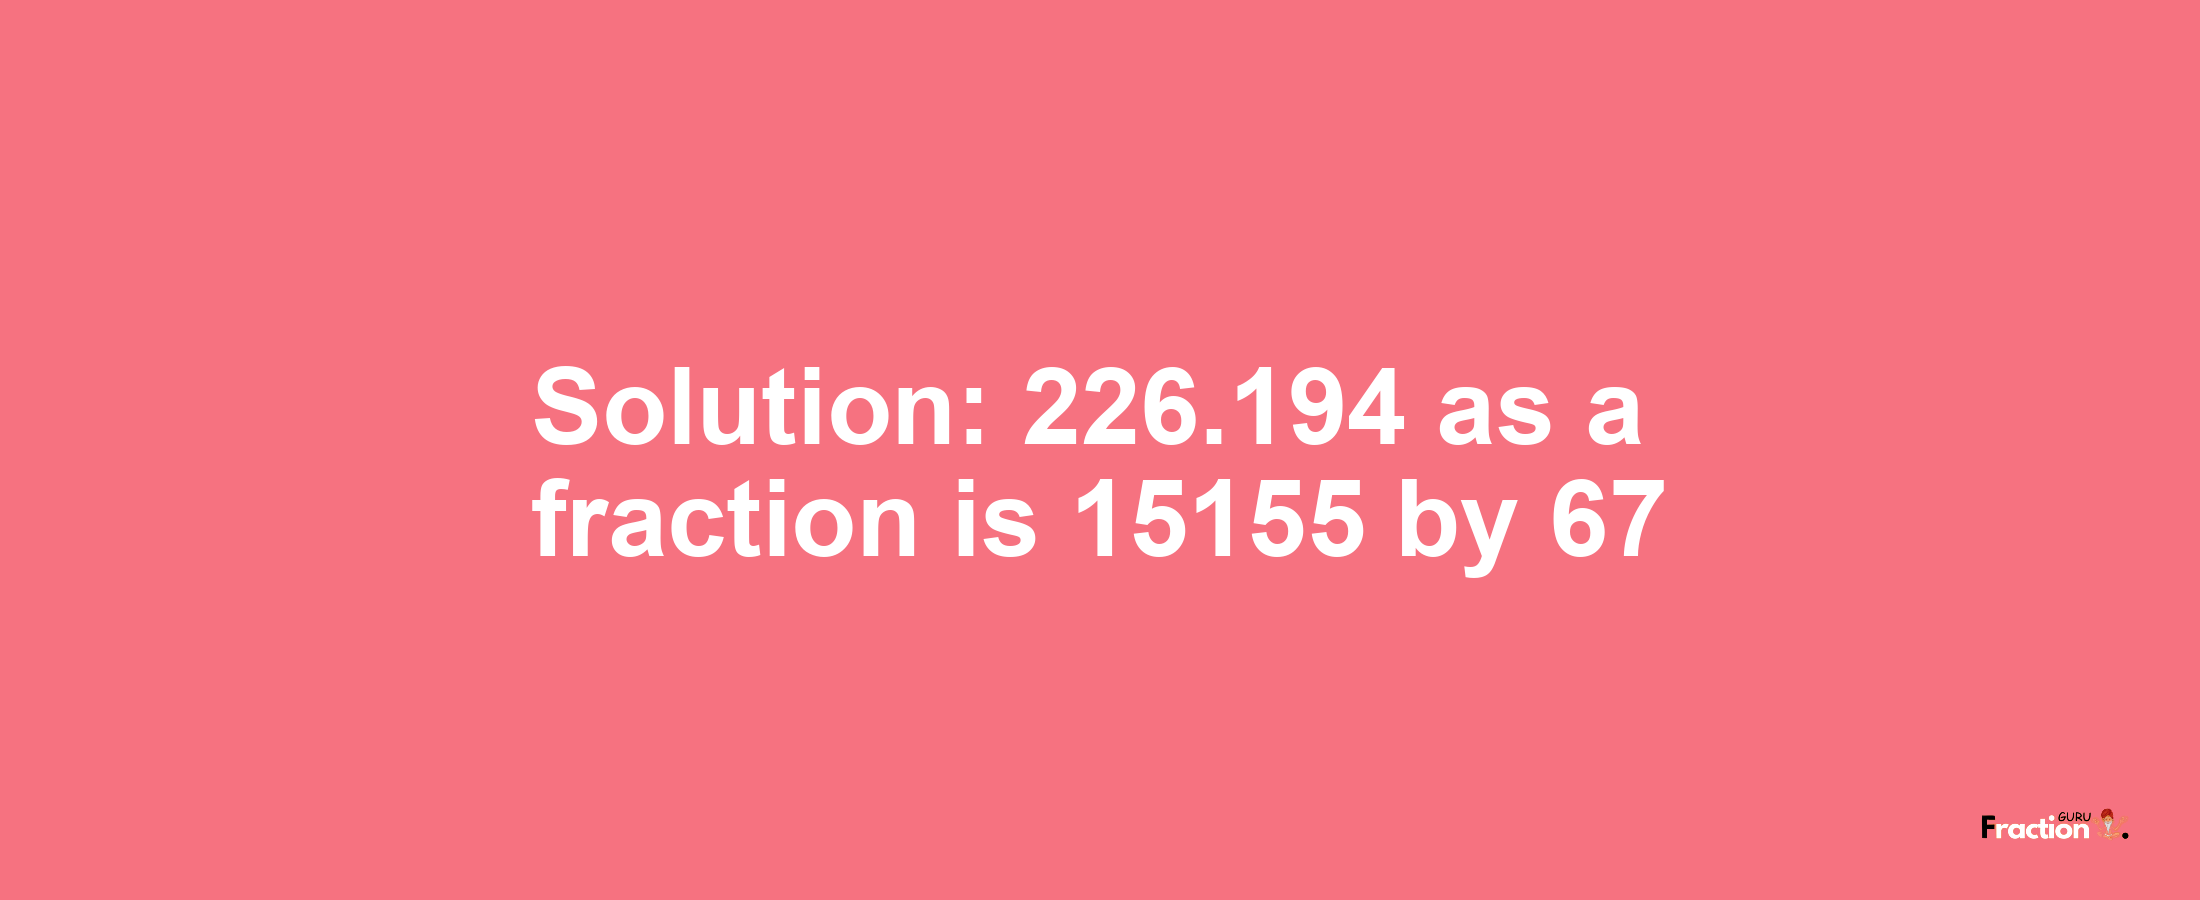 Solution:226.194 as a fraction is 15155/67